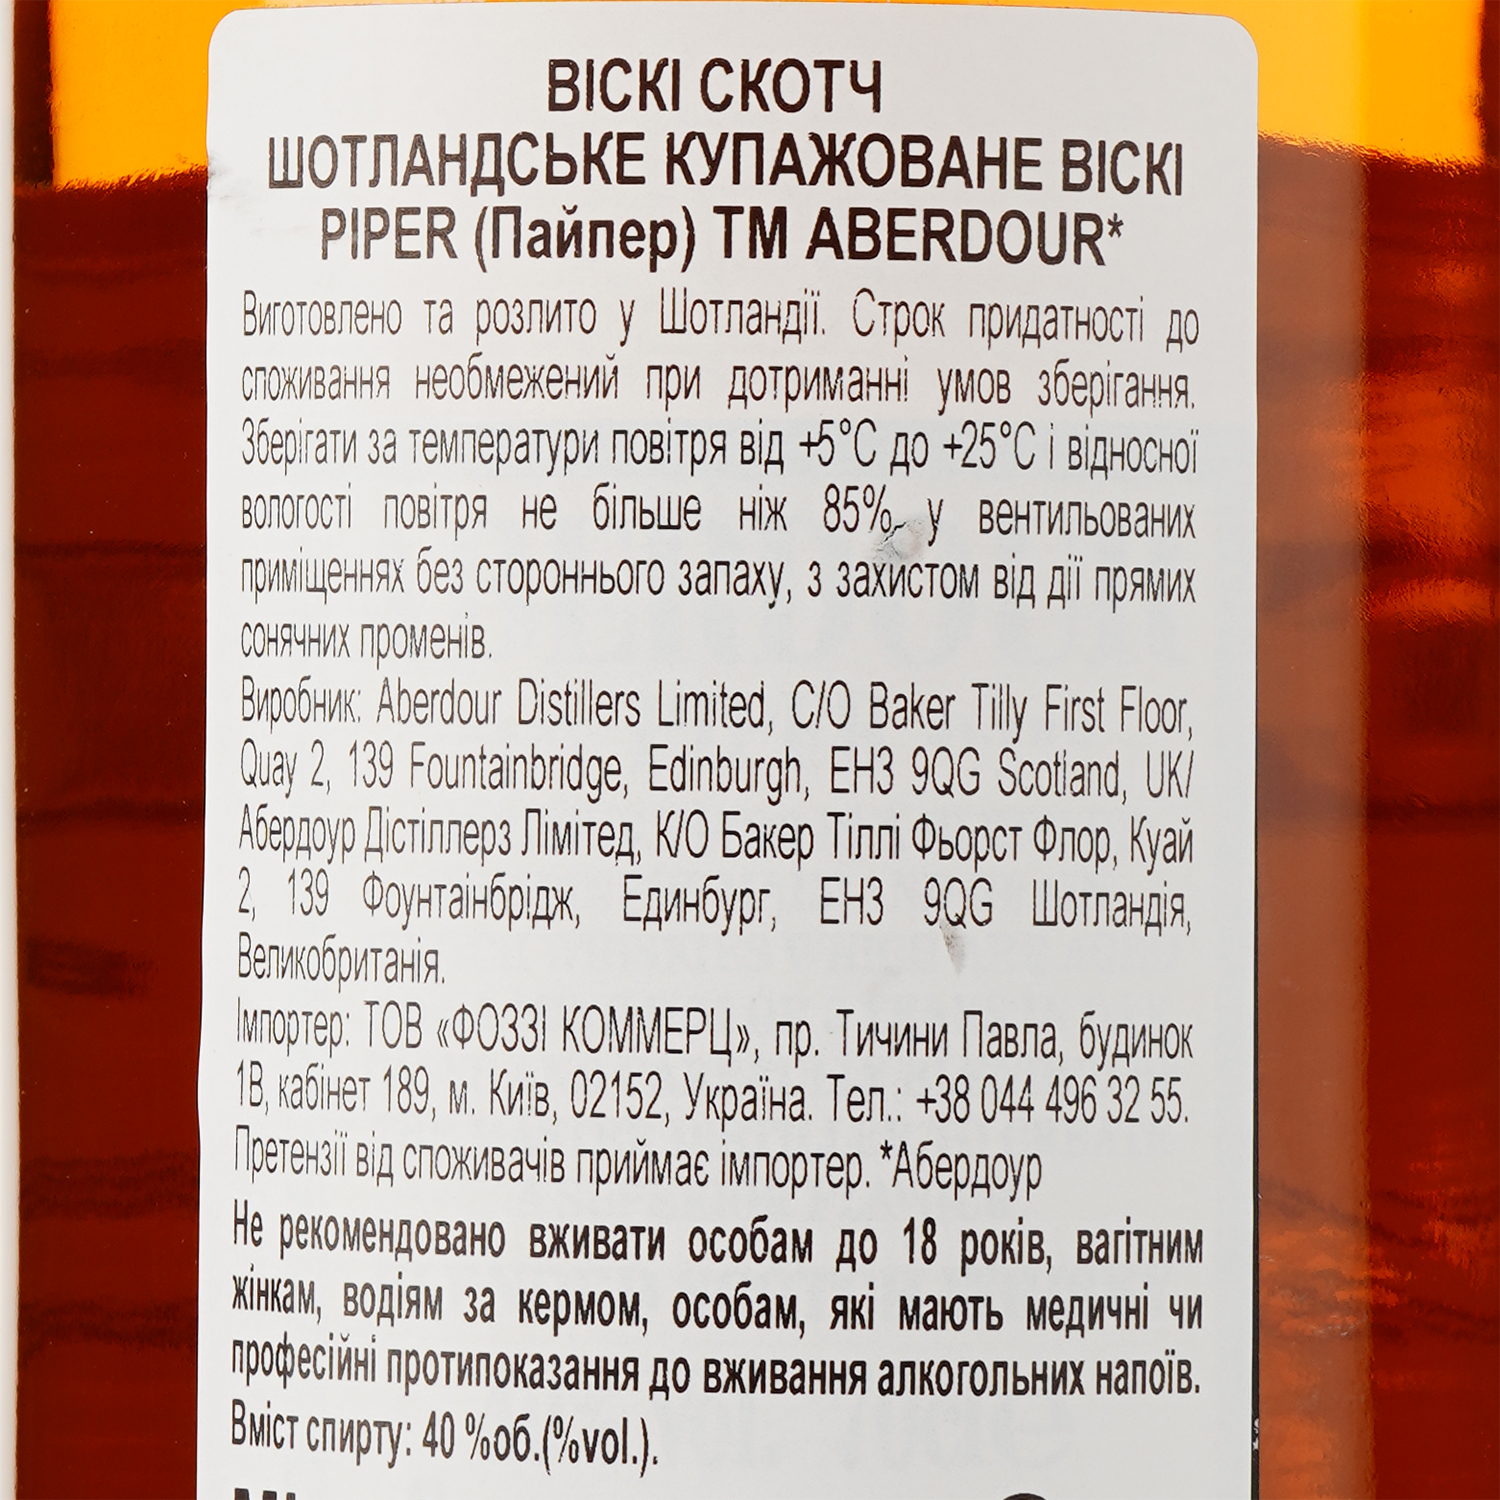 Виски Aberdour Piper Blended Scotch Whisky, 40%, 0,7 л - фото 3